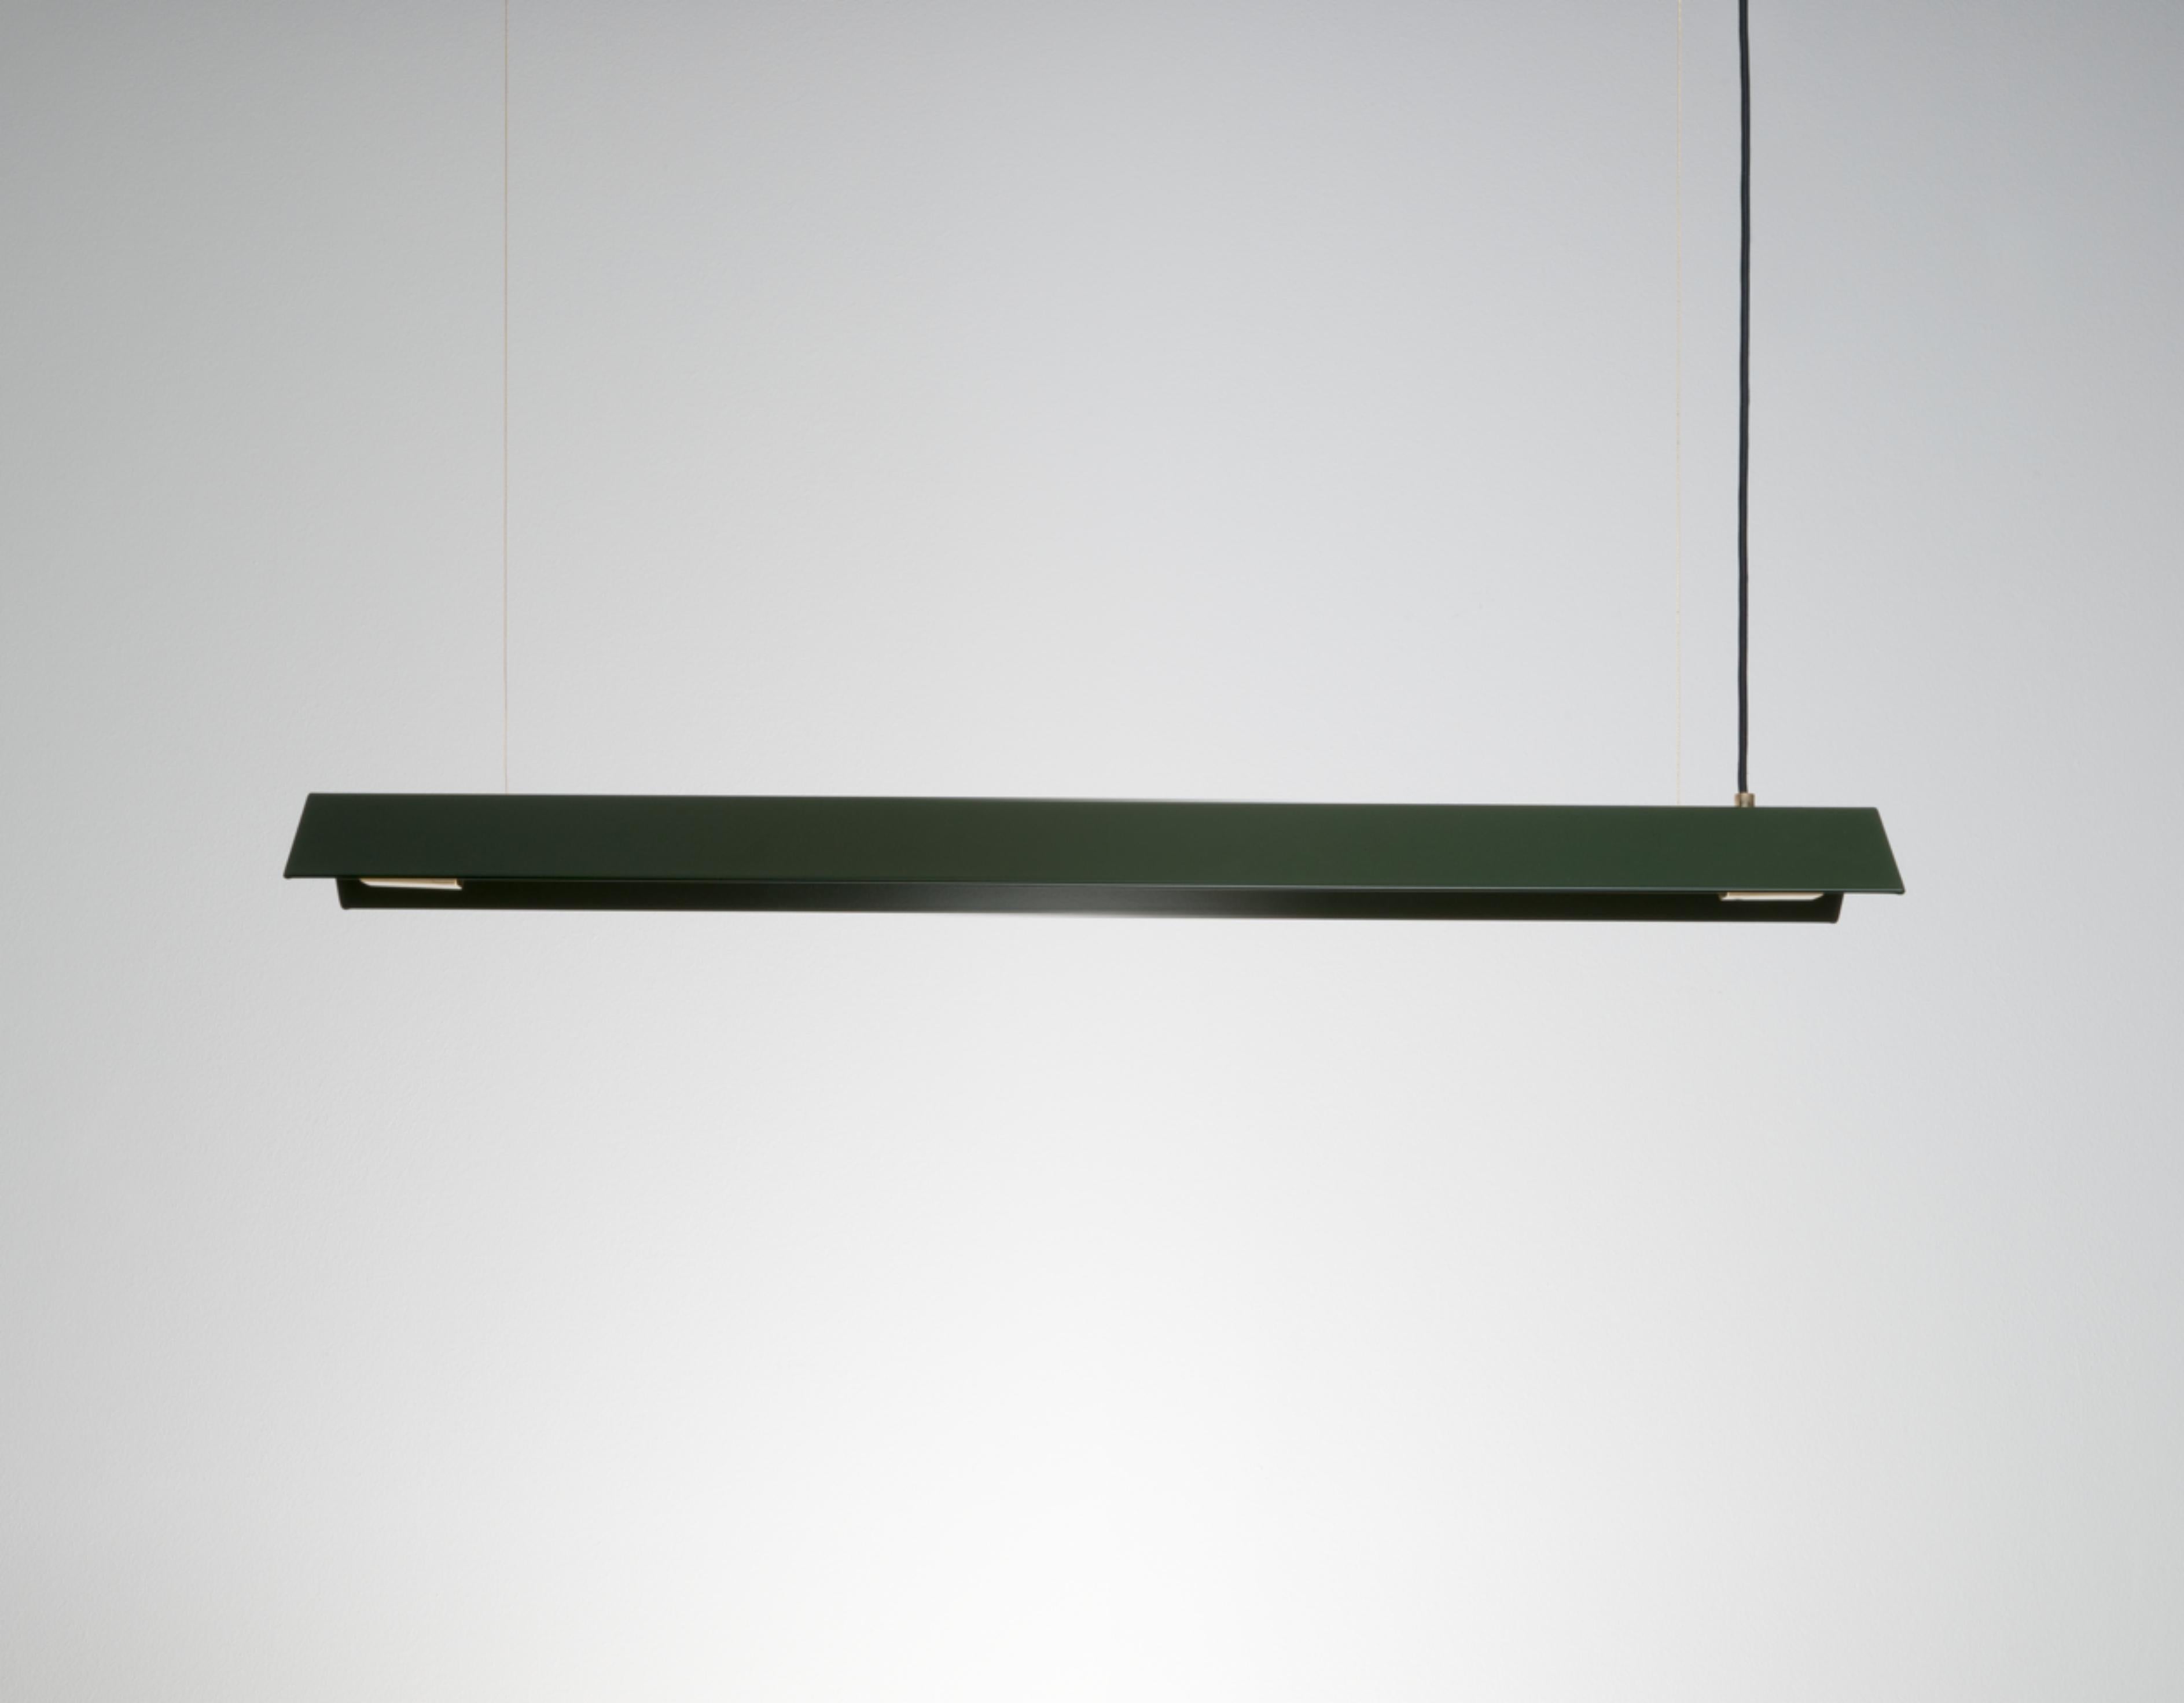 Small Misalliance Ex Bottle Green Suspended Light by Lexavala
Dimensions: D 16 x W 70 x H 8 cm
Materials: powder coated shade with details made of brass or stainless steel.

There are two lenghts of socket covers, extending over the LED. Two